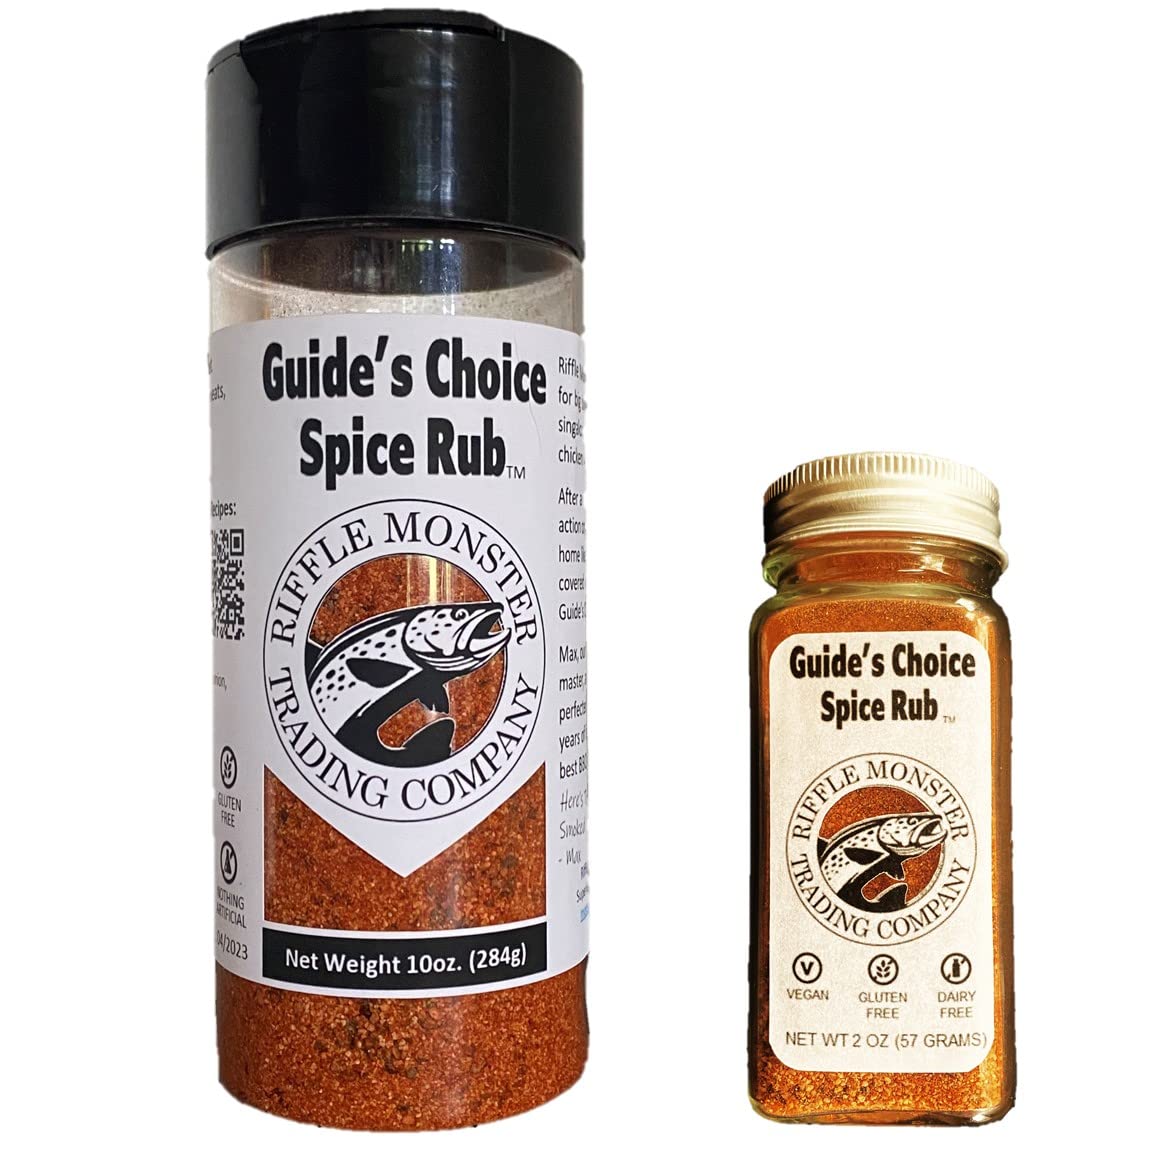 Guide's Choice Spice Rub, All Purpose Seasoning Blend - Spicy Hot & Honey  Sweet, Low Salt - For Grilling, Smoking and Searing Chicken, Fish, Pork,  Shrimp, Hamburgers, Potatoes, Veggies, Cocktails, EVERYTHING 